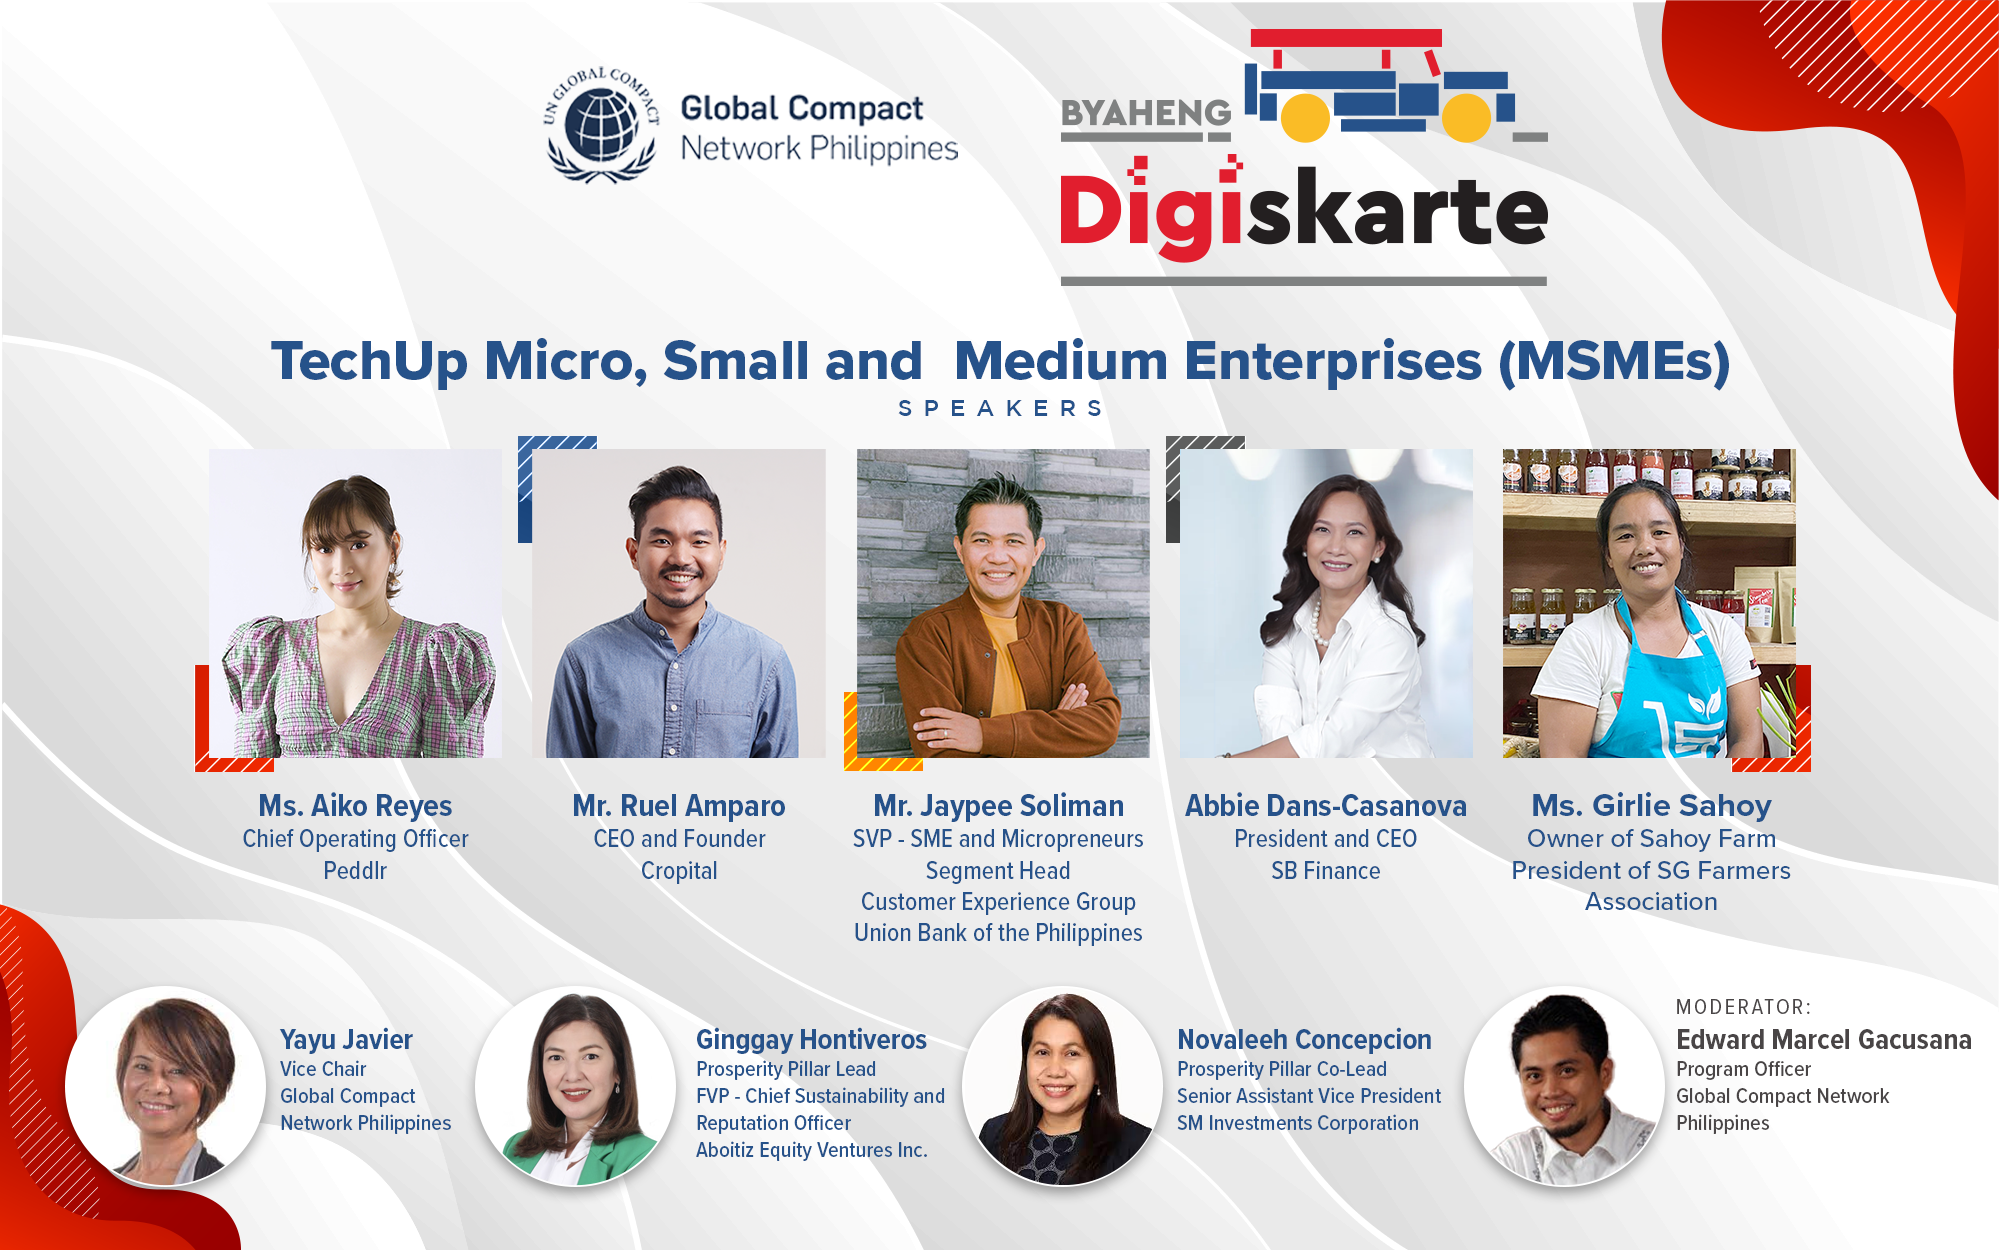 Aboitiz leads tech-up MSMEs webinar for local United Nations private sector network